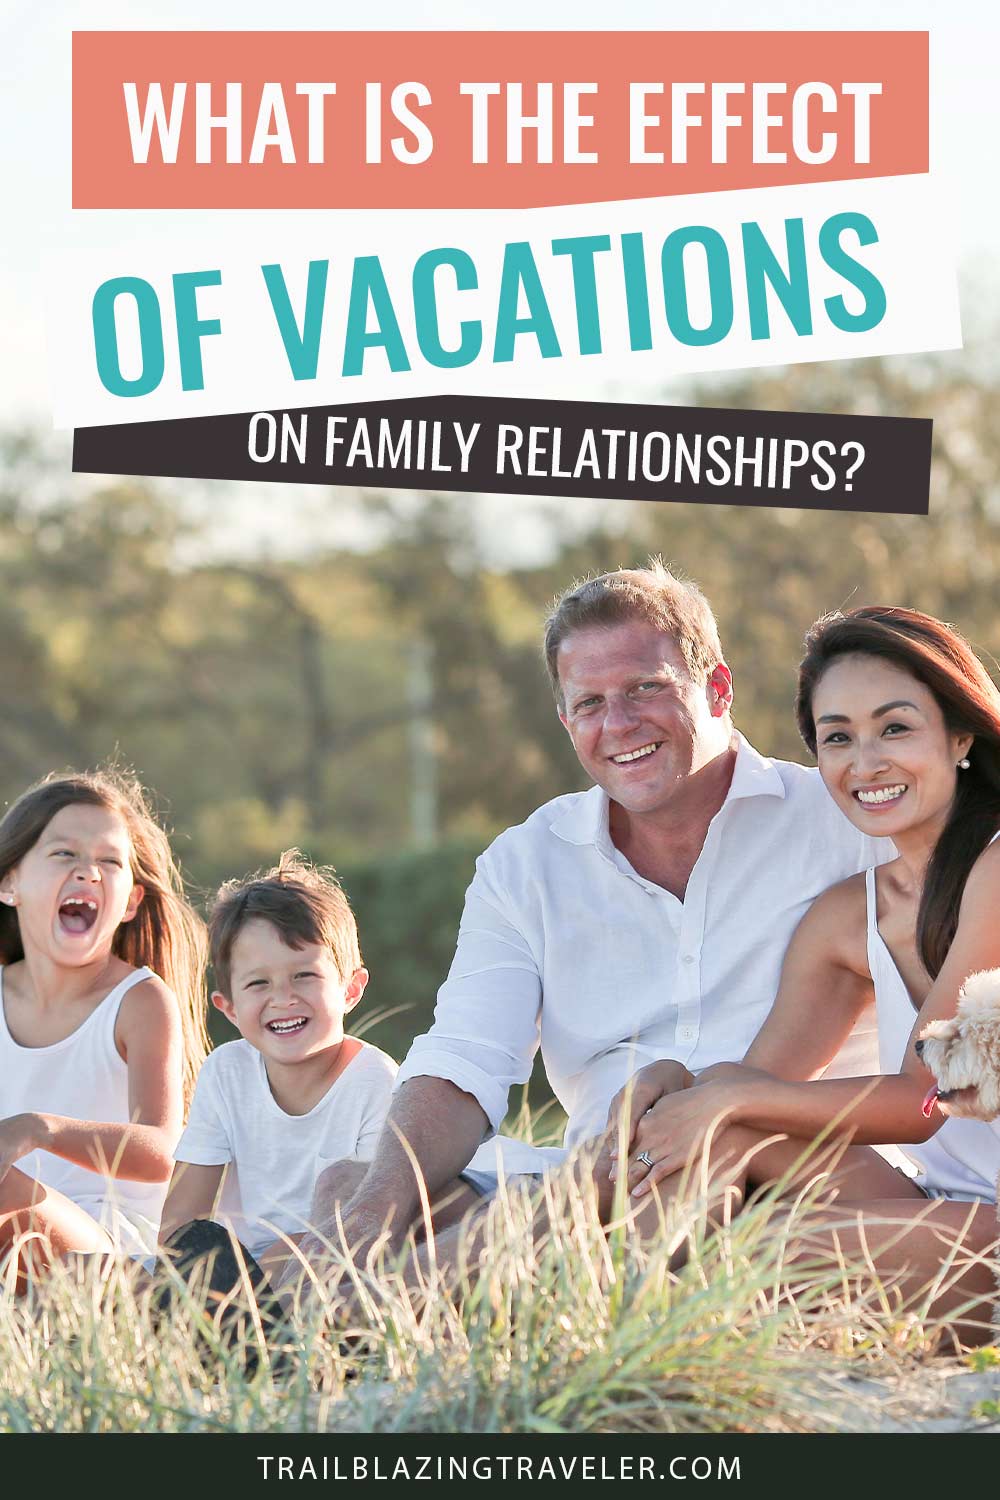 A happy family sitting outdoors - What Is The Effect Of Vacations On Family Relationships?